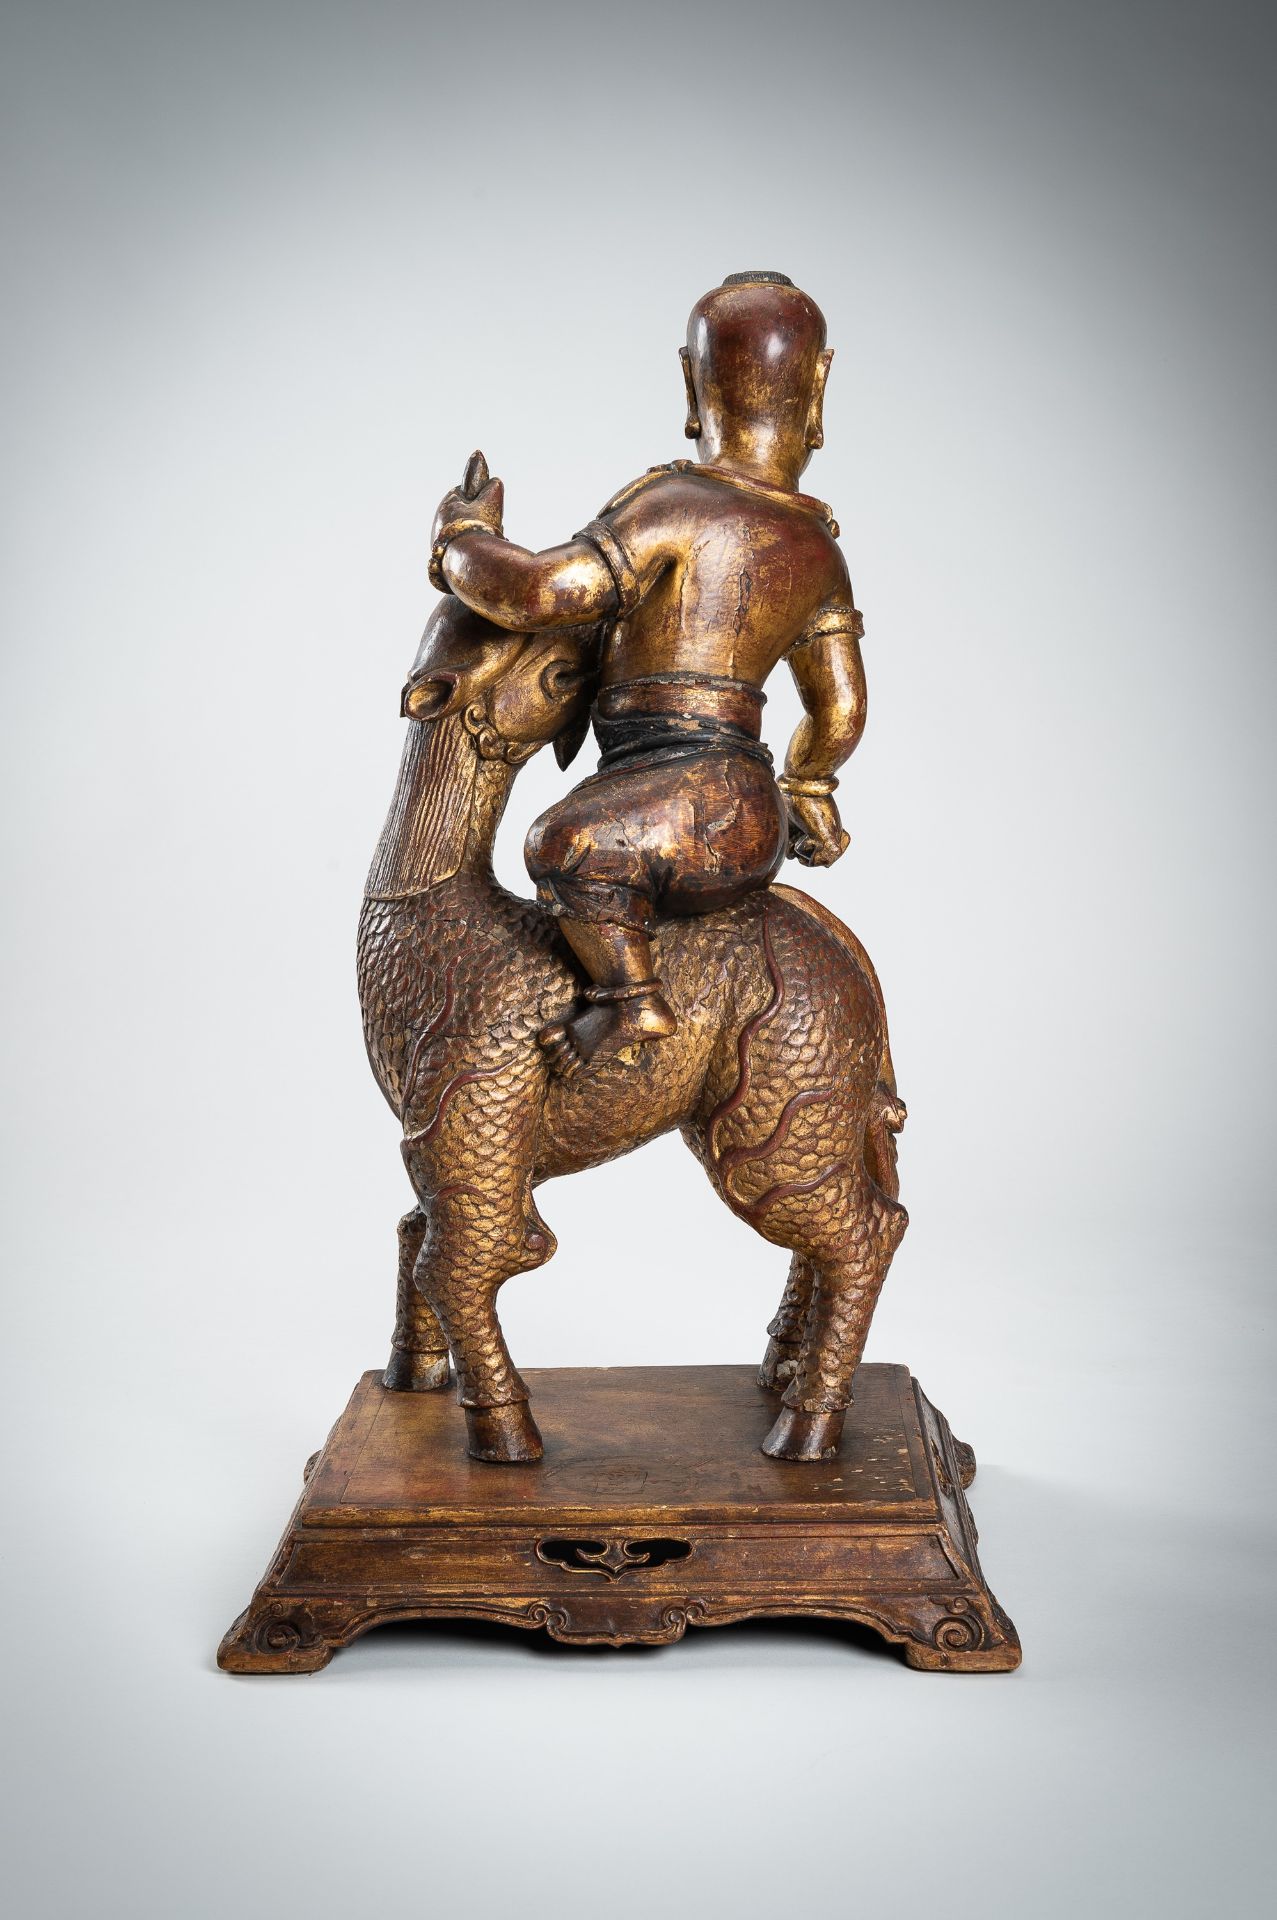 A VERY LARGE GILT-LACQUERED WOOD STATUE OF YOUNG BUDDHA RIDING QILIN - Image 17 of 19